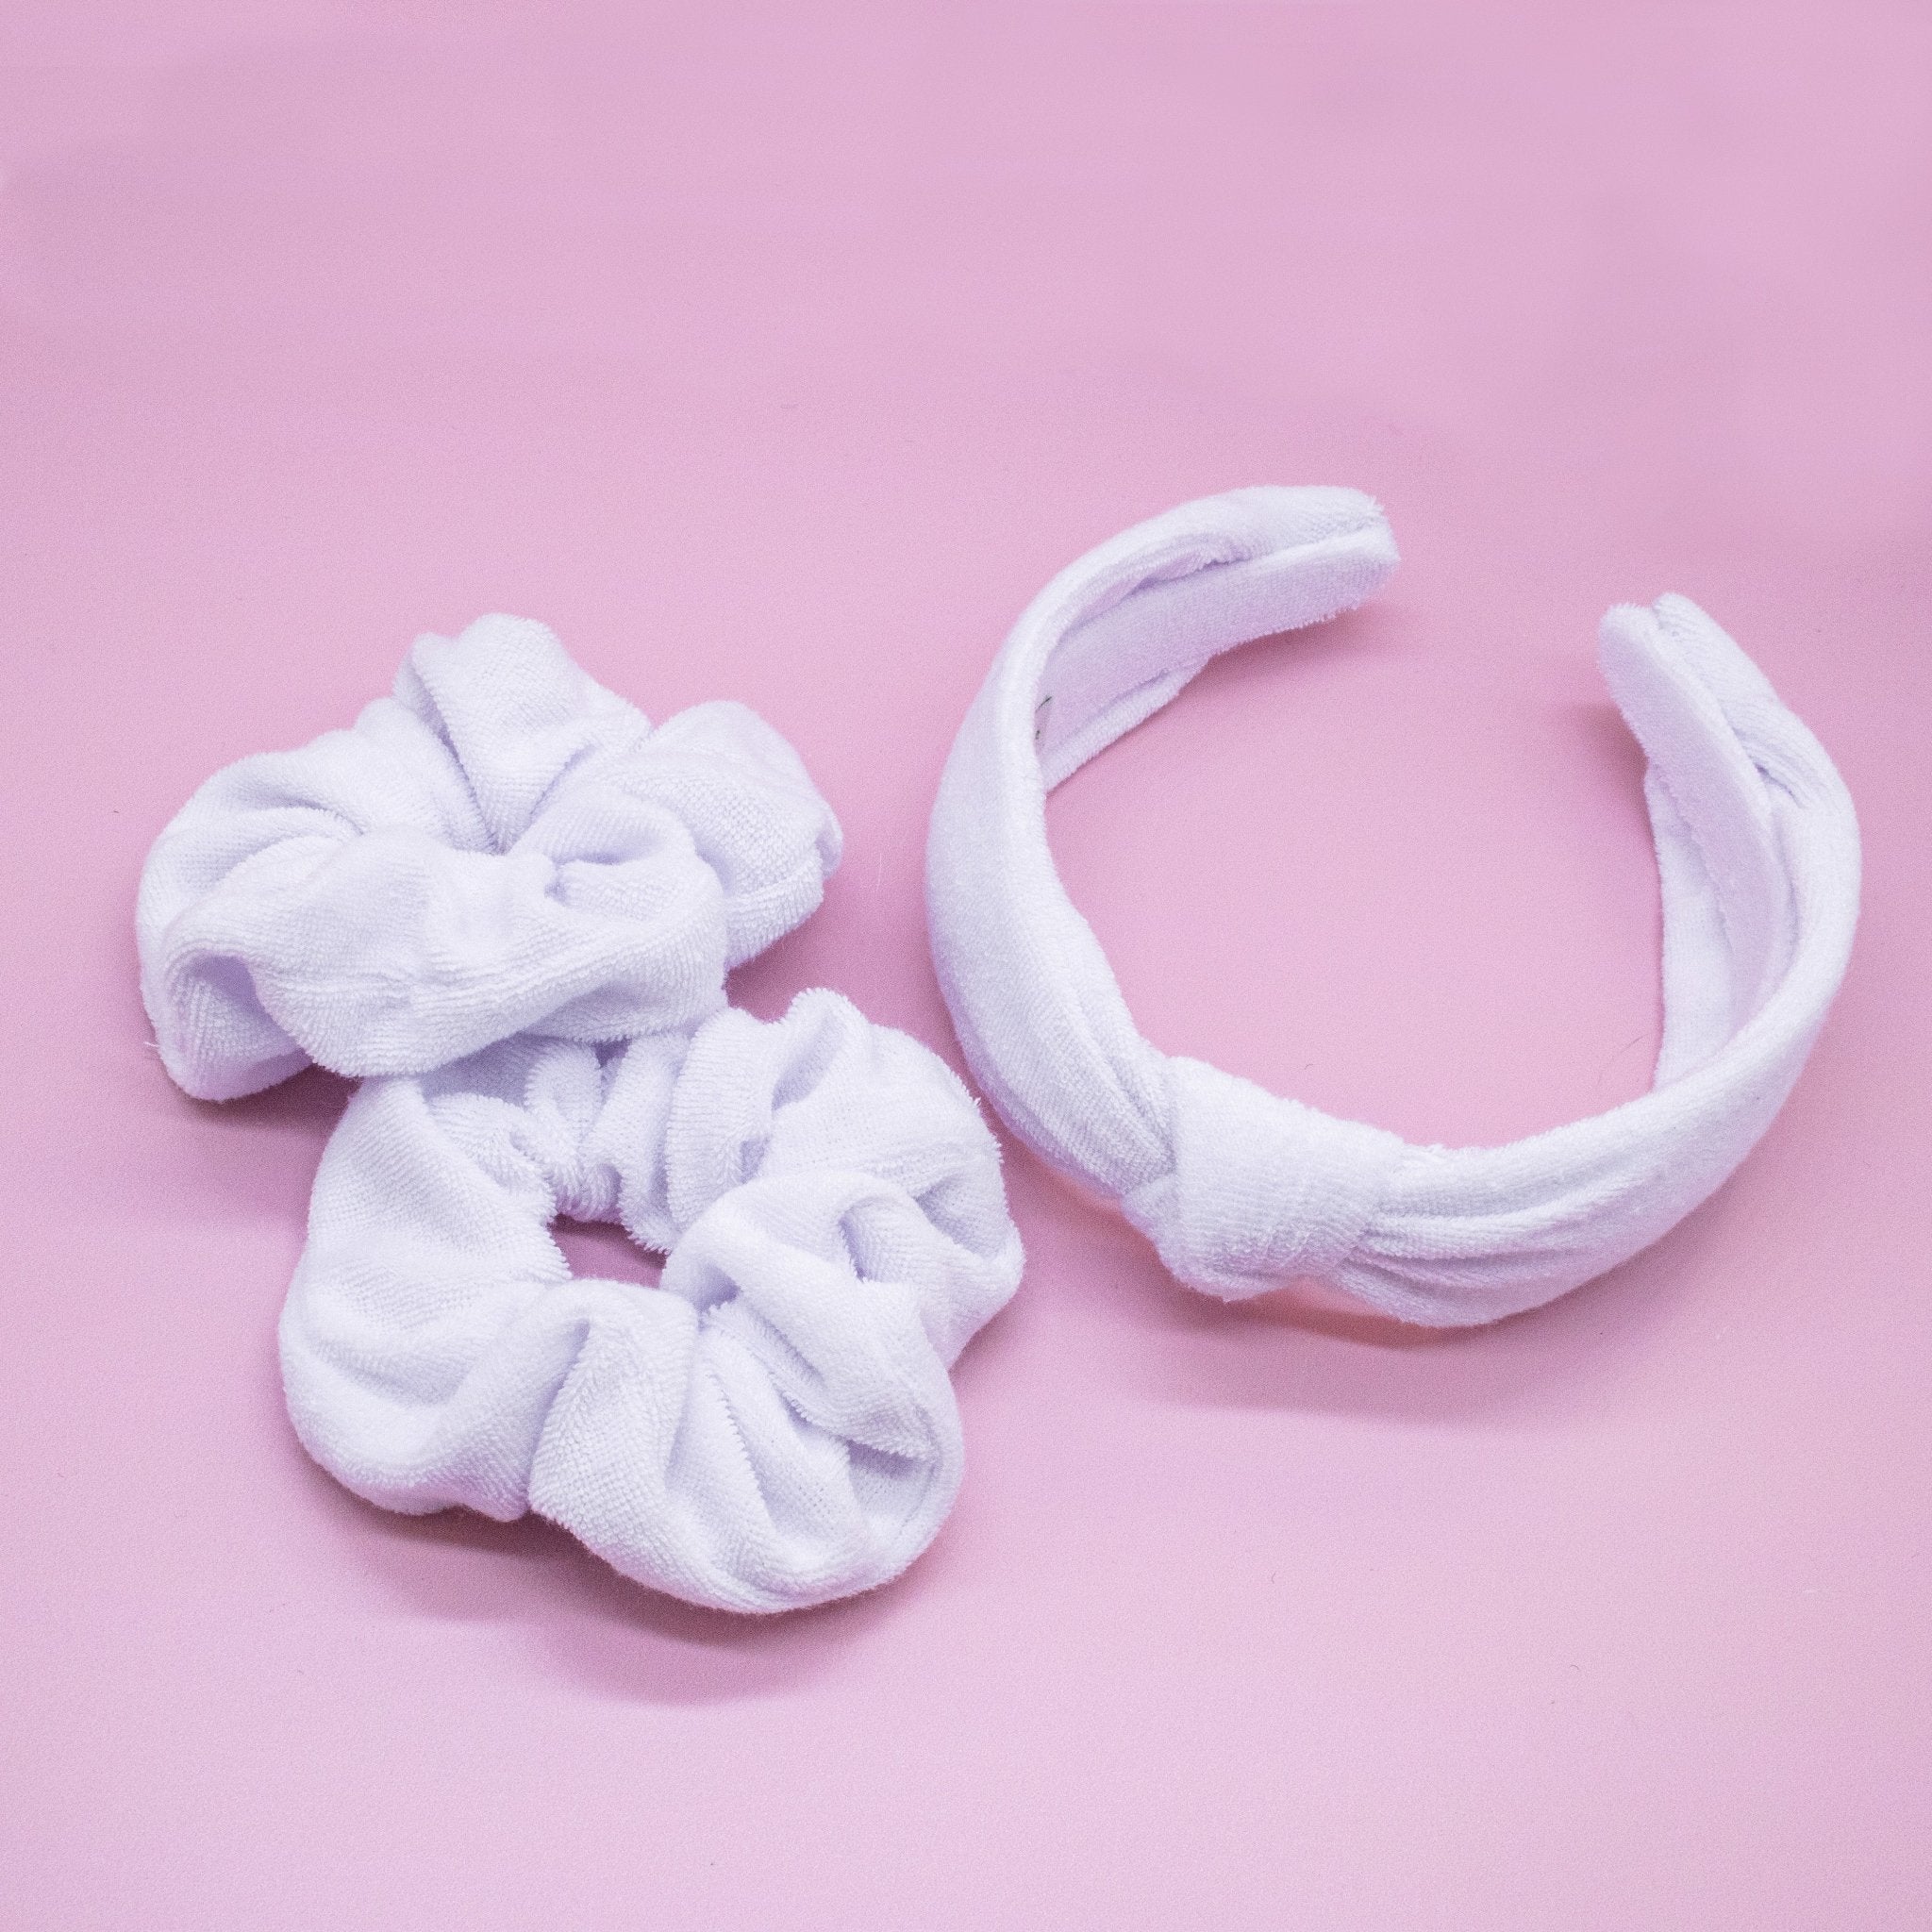 Terrycloth Knot Spa Headband and Scrunchie Wristbands - FROG SAC